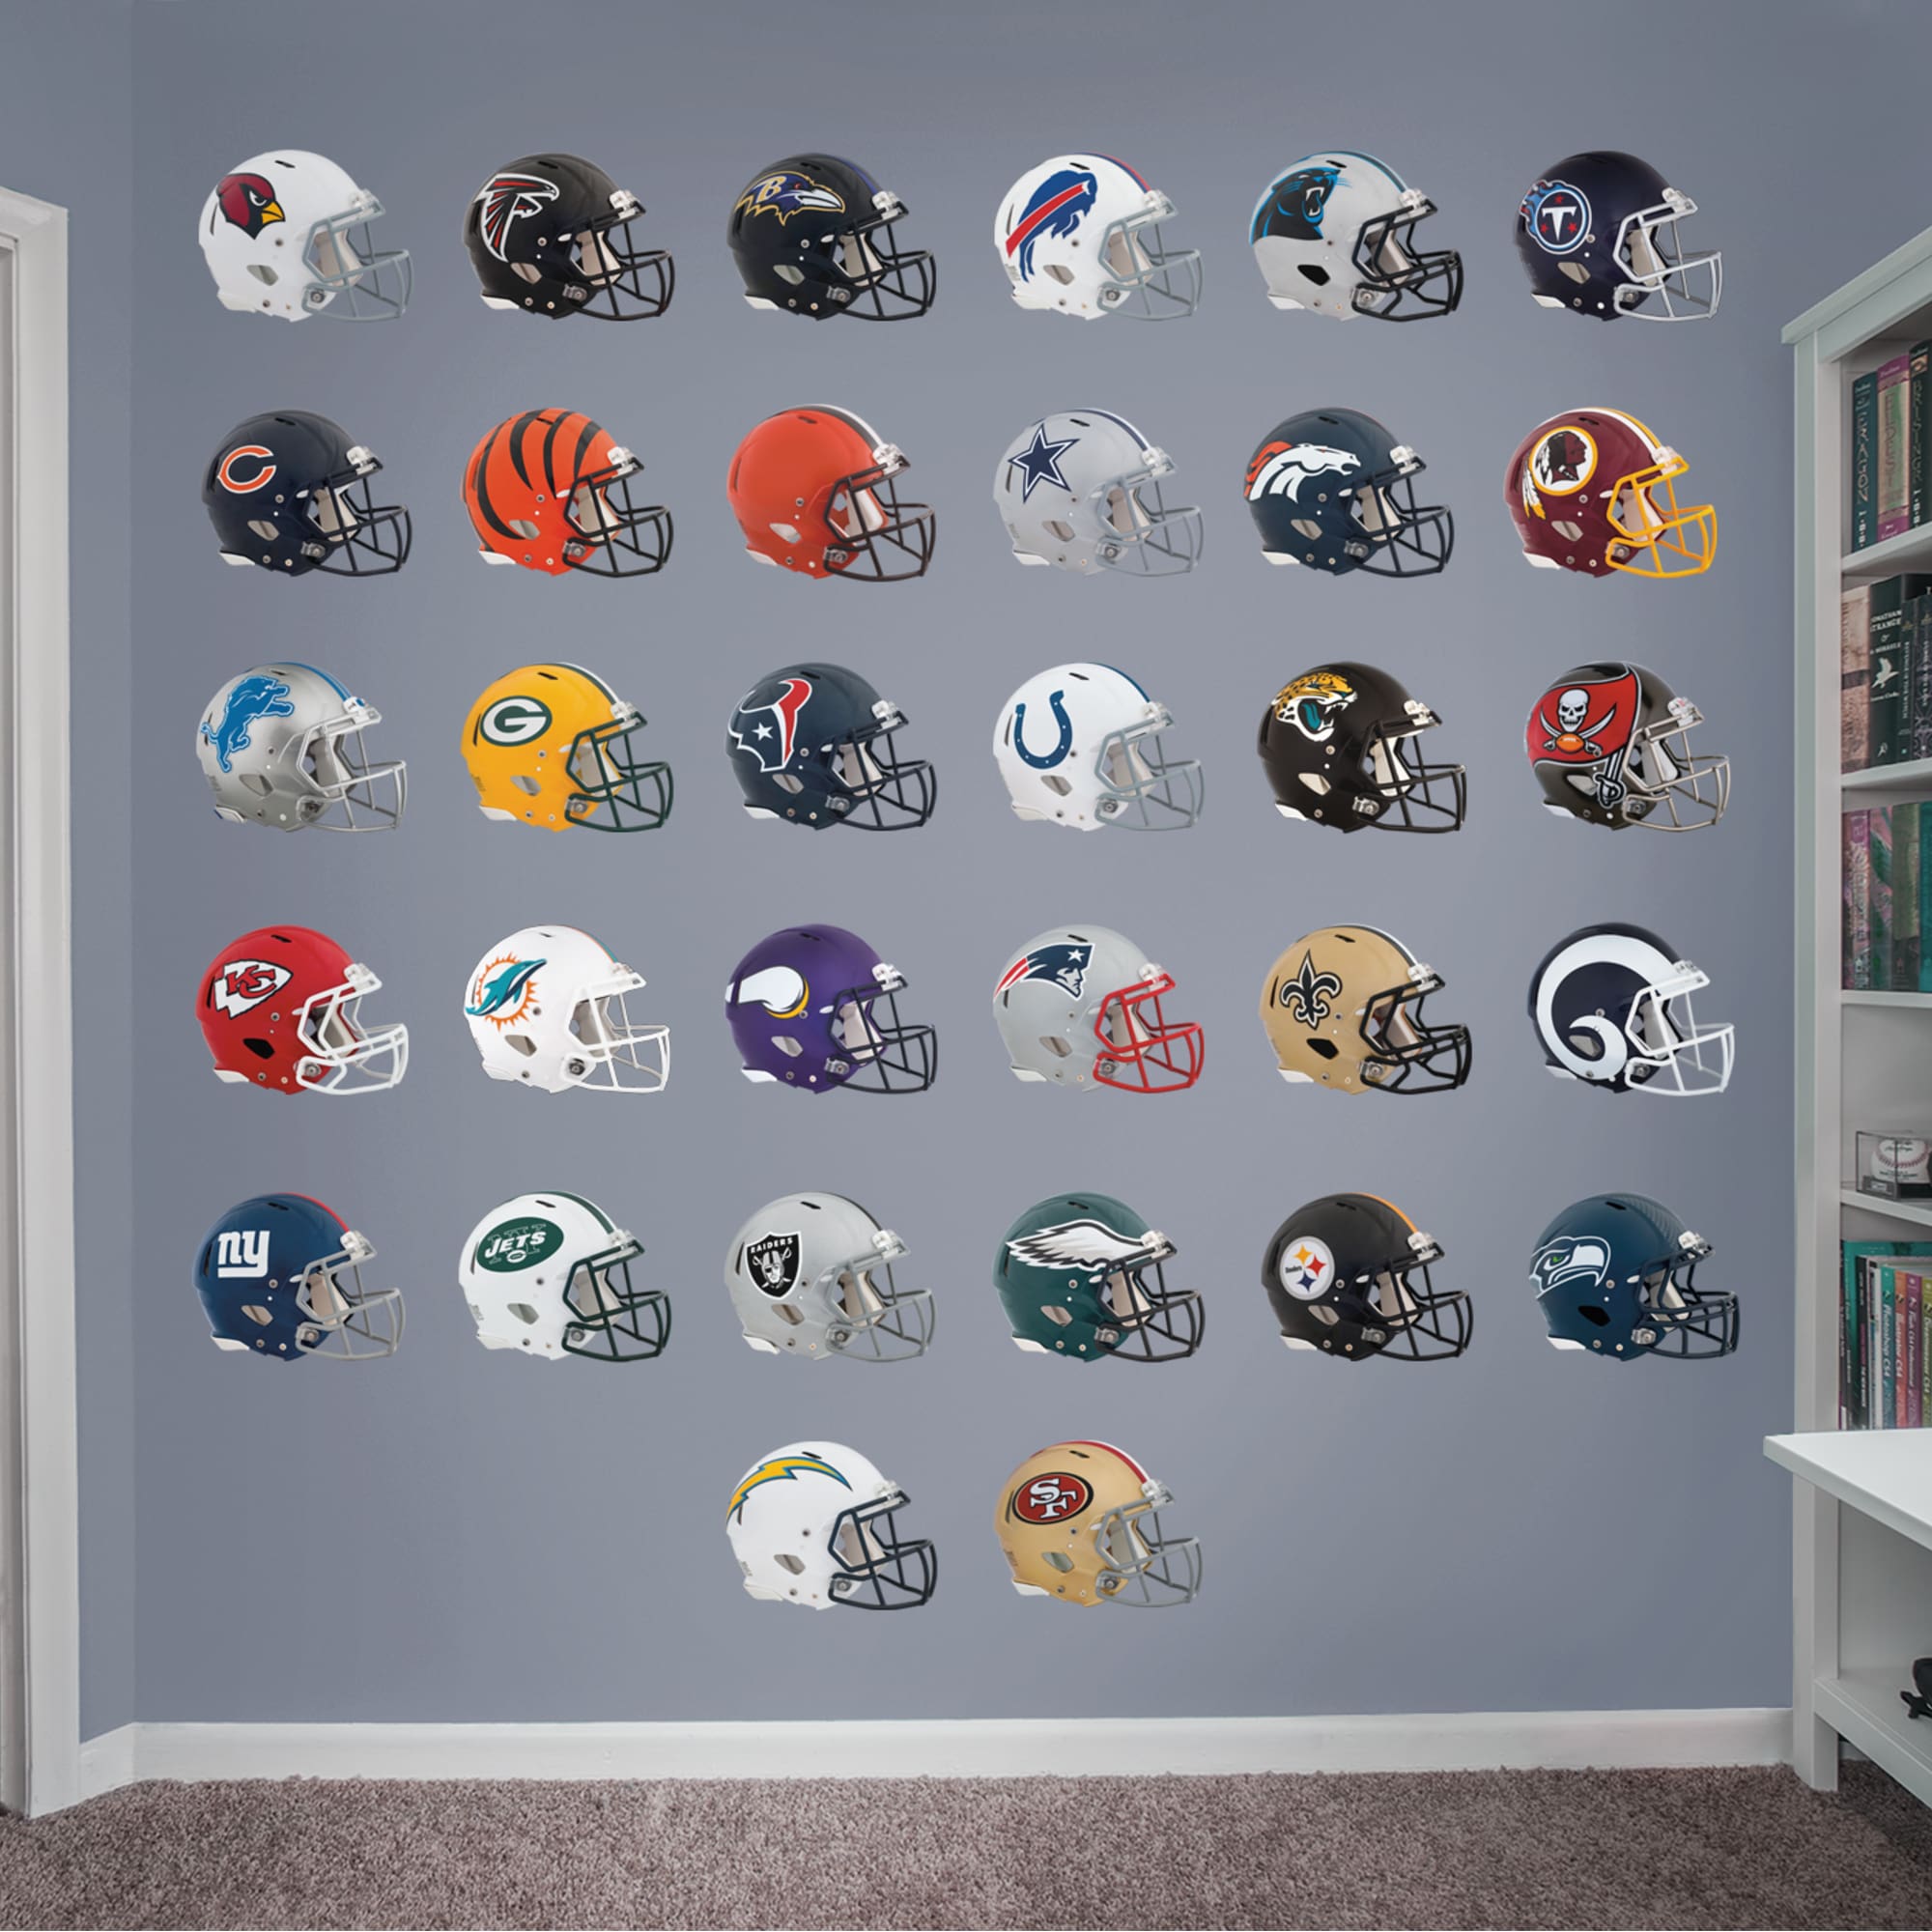 NFL: Team Helmet Collection - Officially Licensed NFL Removable Wall Decals 11.0"W x 9.0"H by Fathead | Vinyl